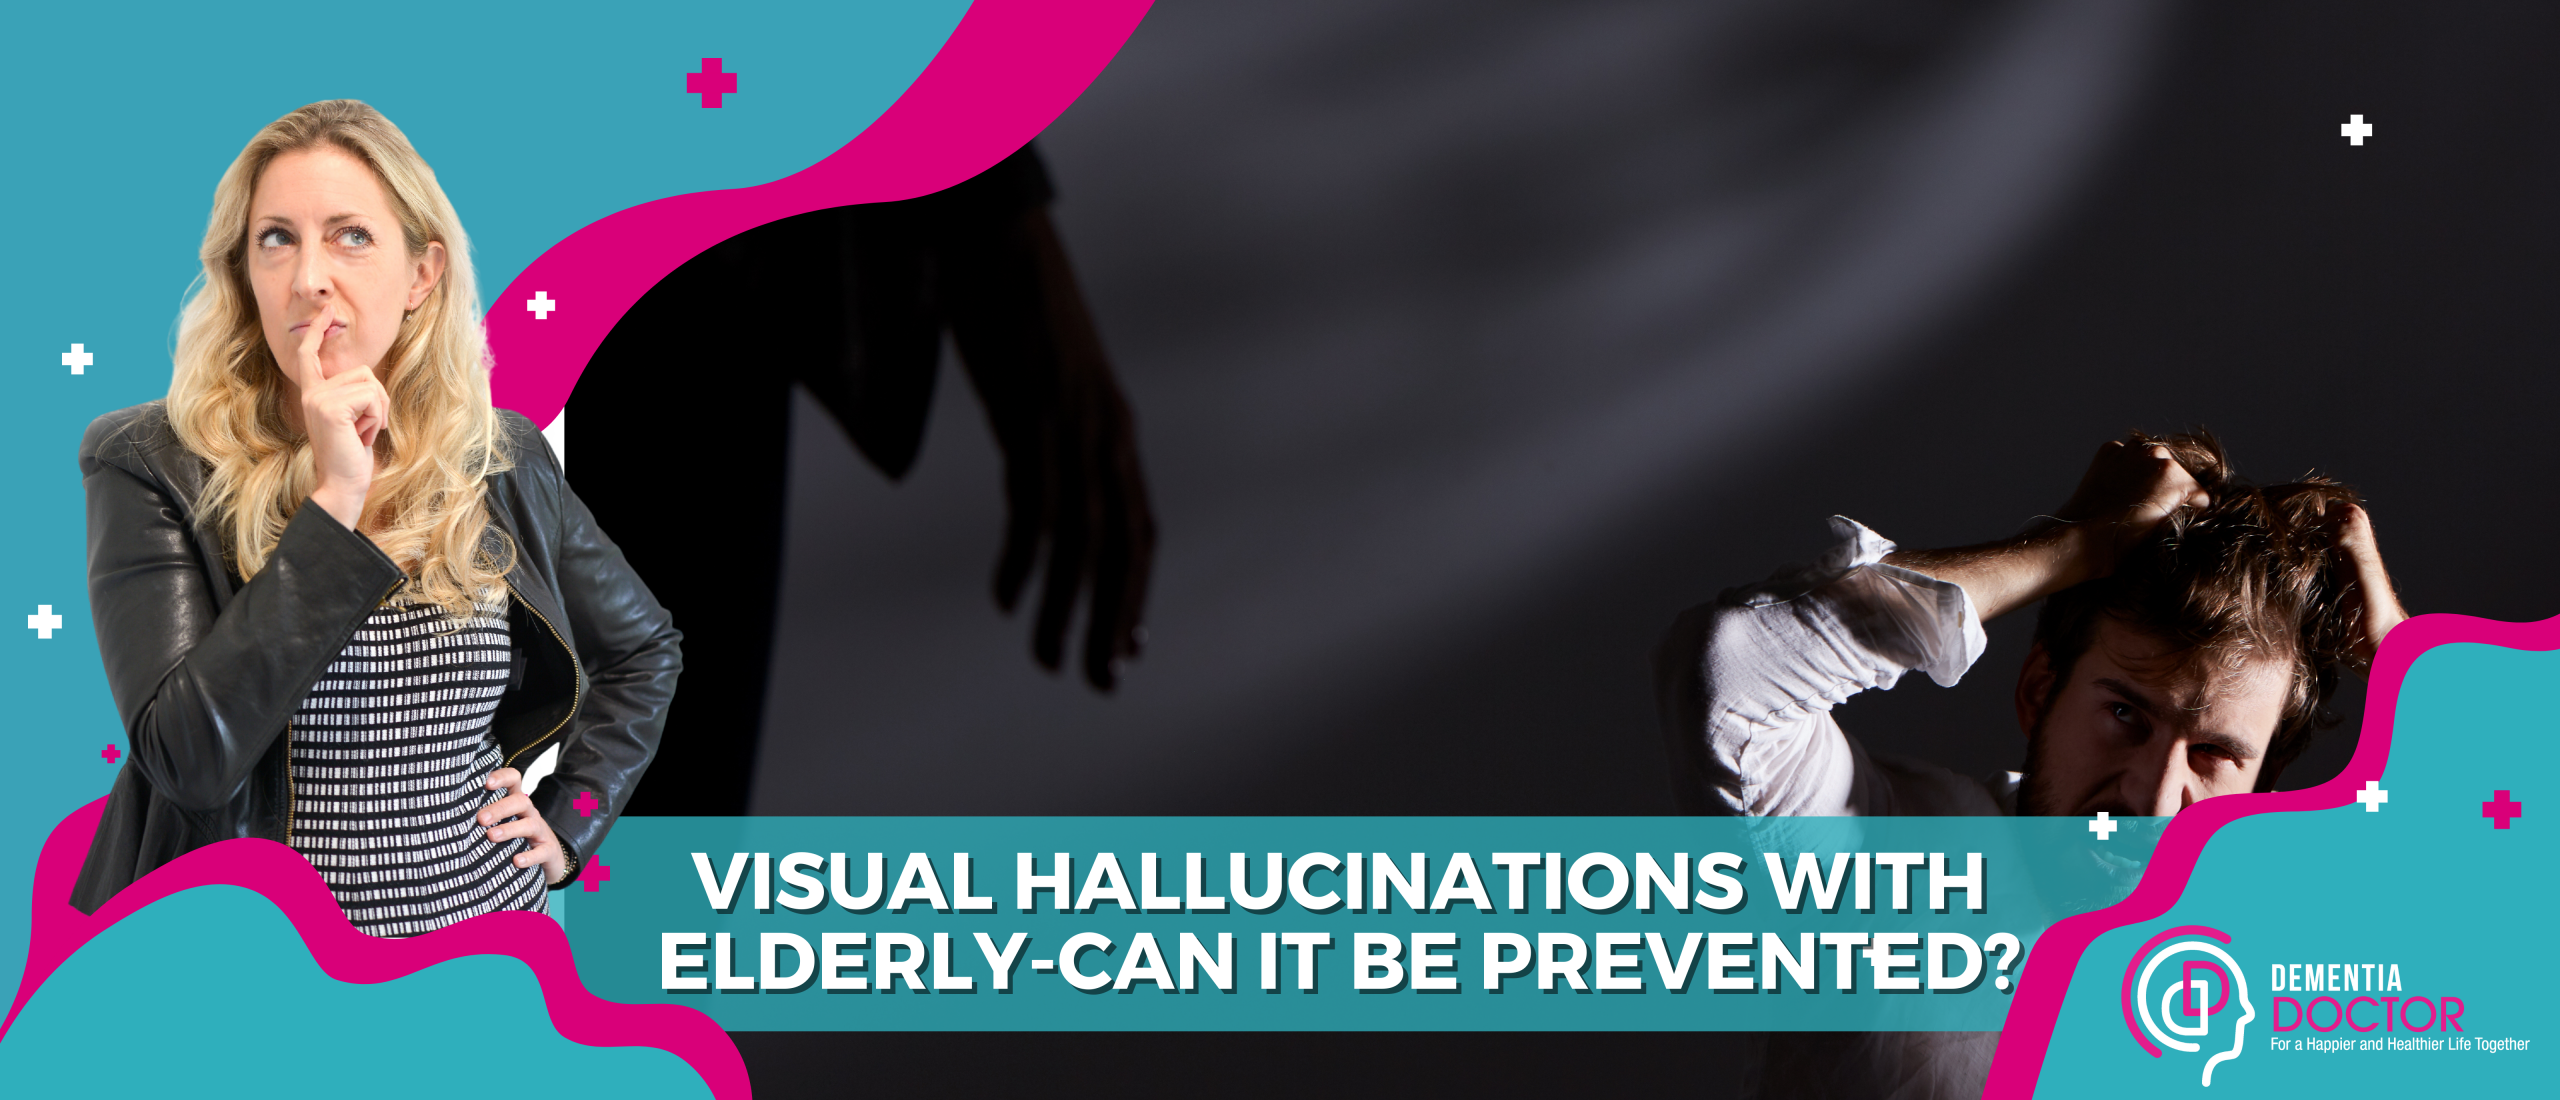 Visual hallucinations with elderly. Can it be prevented?